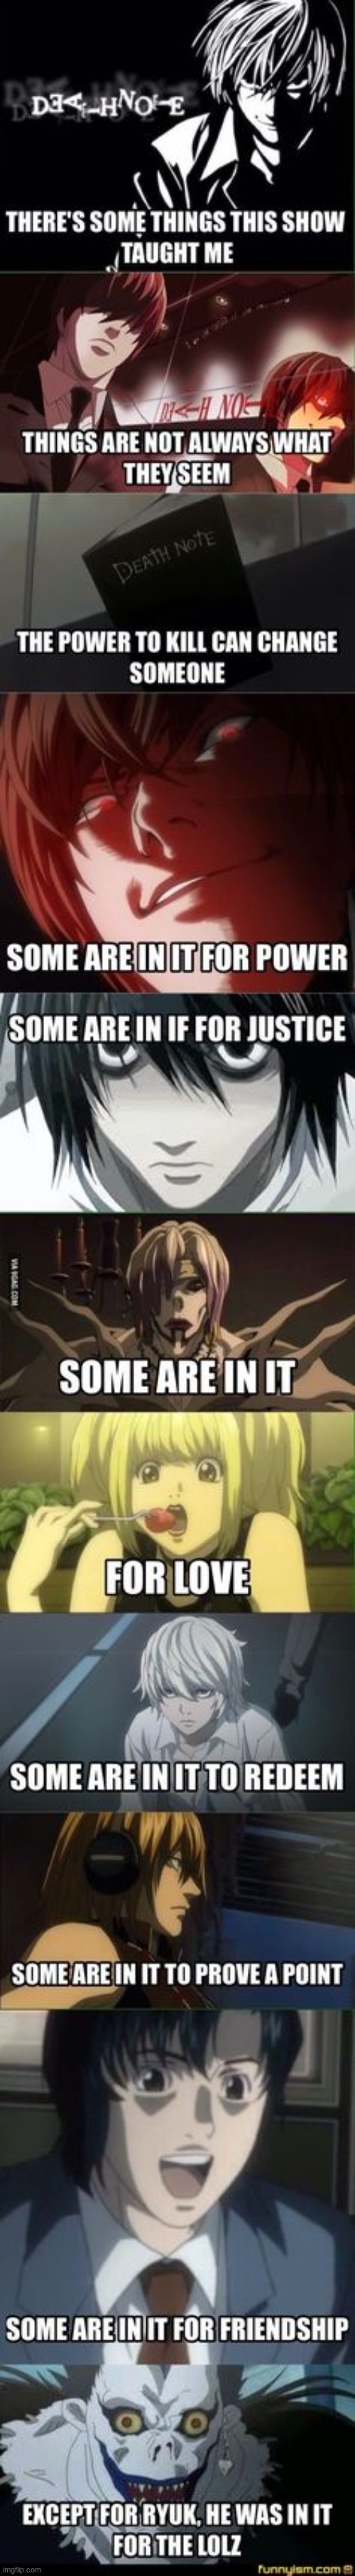 yeah basically all he did in the show was laugh | image tagged in death note | made w/ Imgflip meme maker